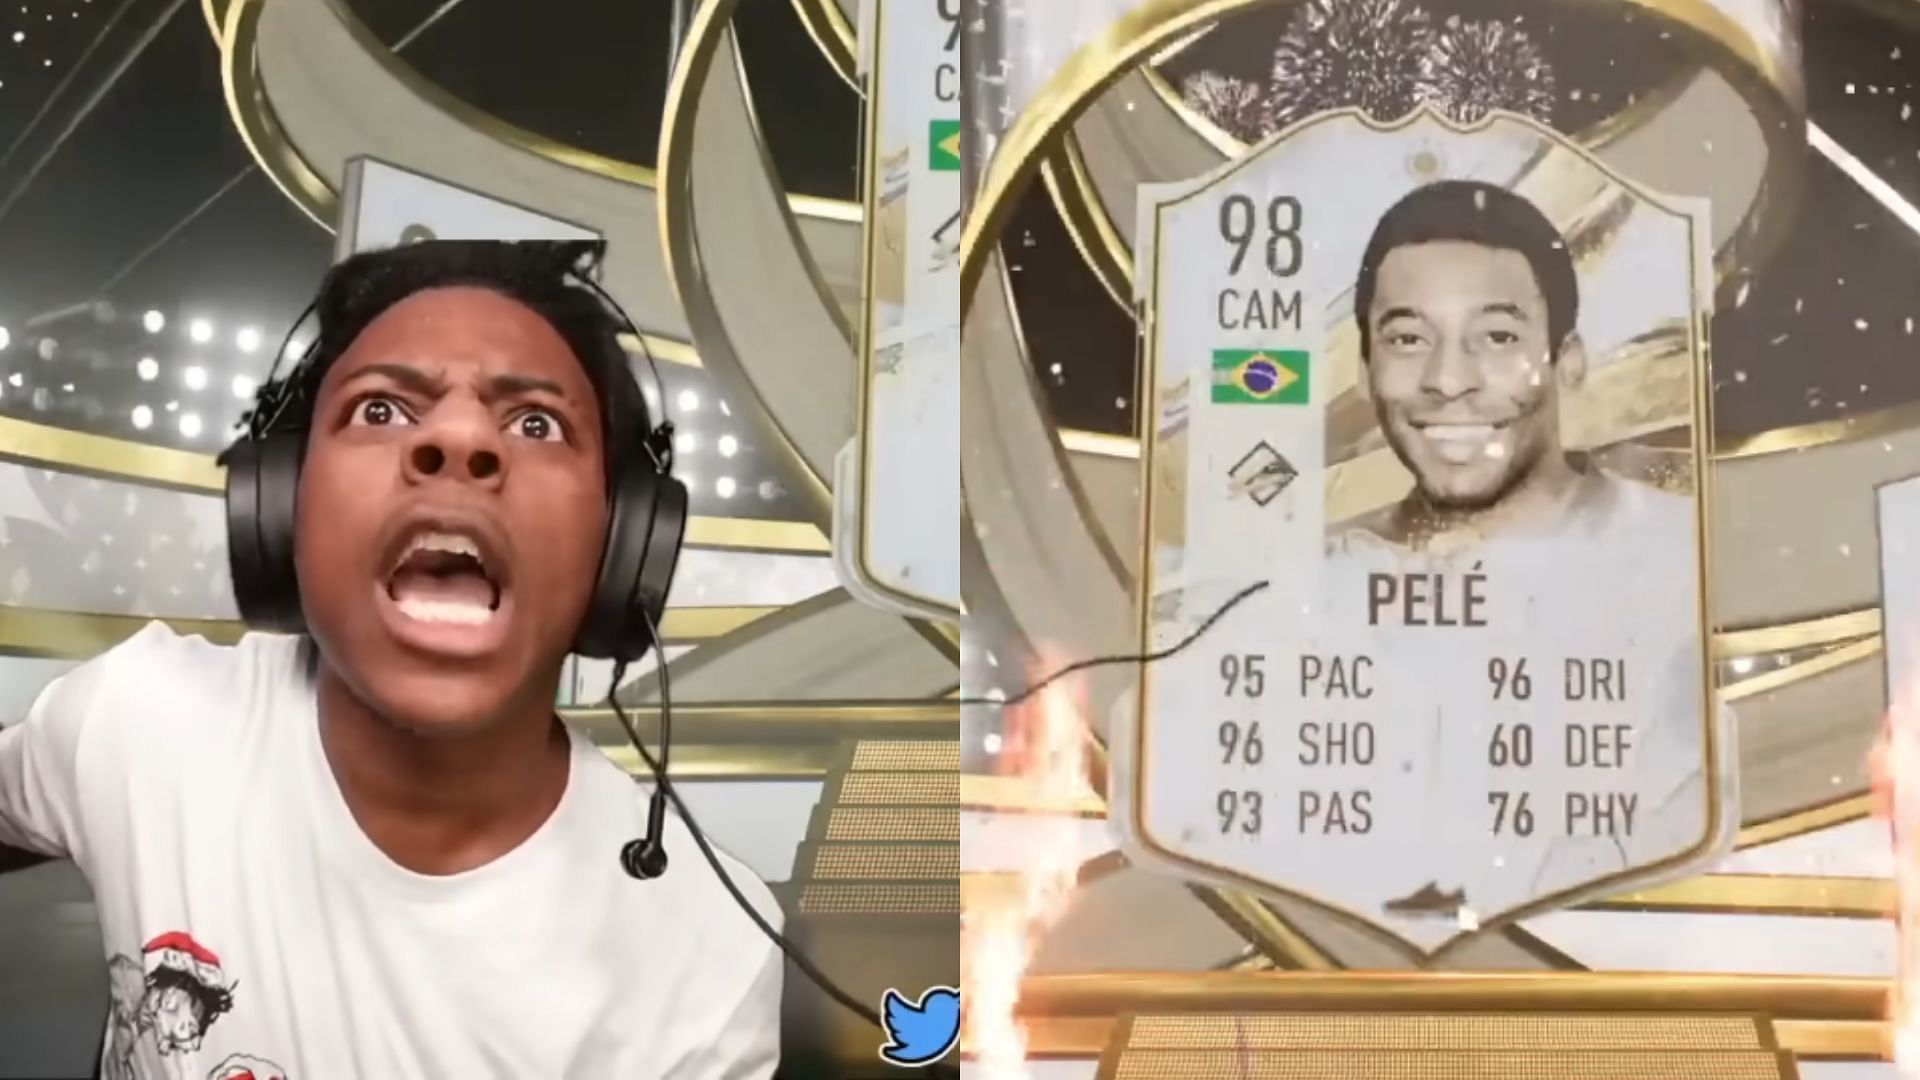 IShowSpeed reacts after packing Pele in FIFA 23 (Image via YouTube)